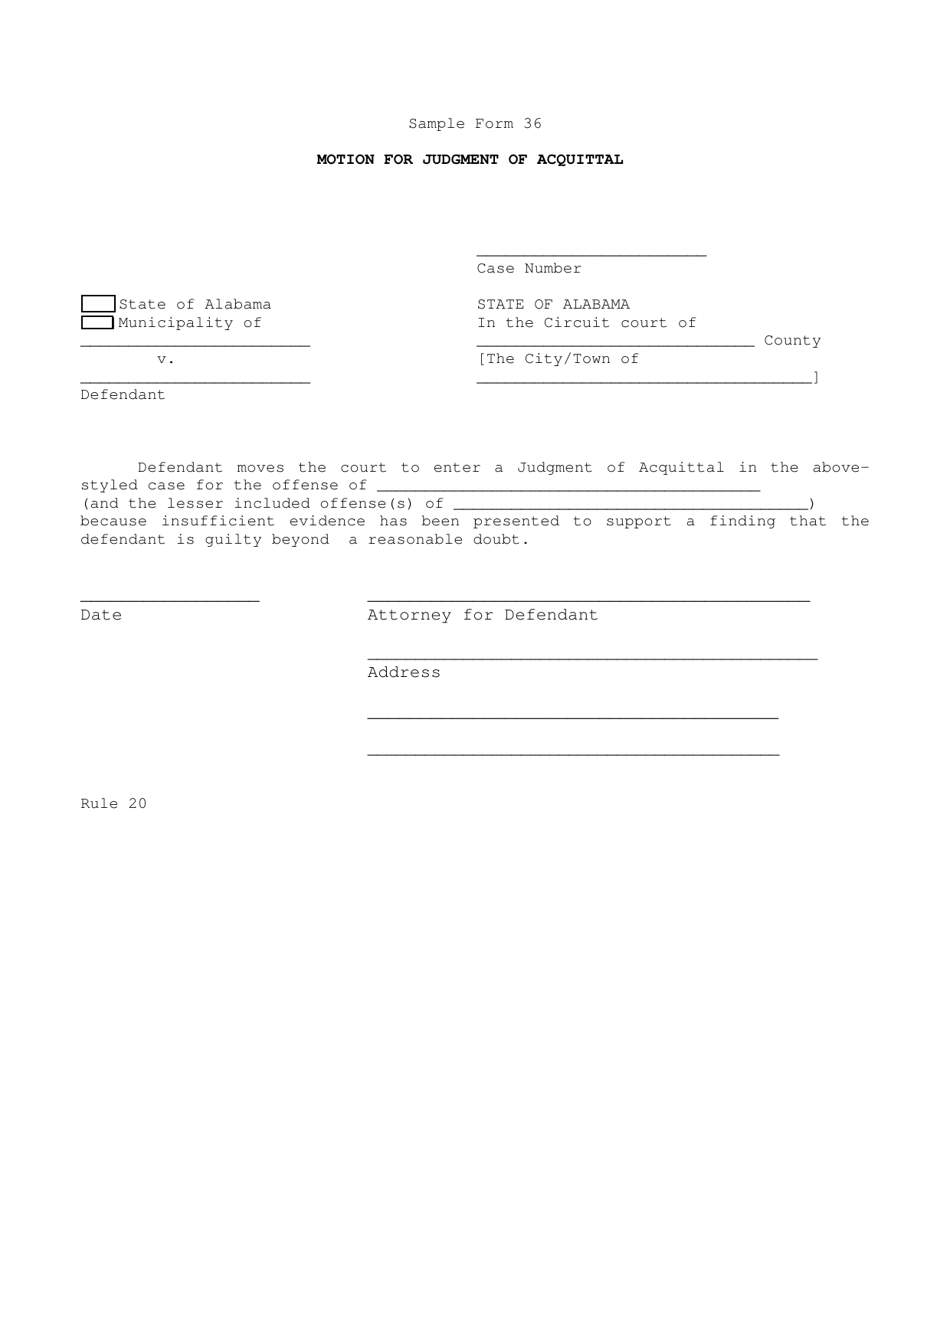 Sample Form 36 Motion for Judgment of Acquittal - Alabama, Page 1